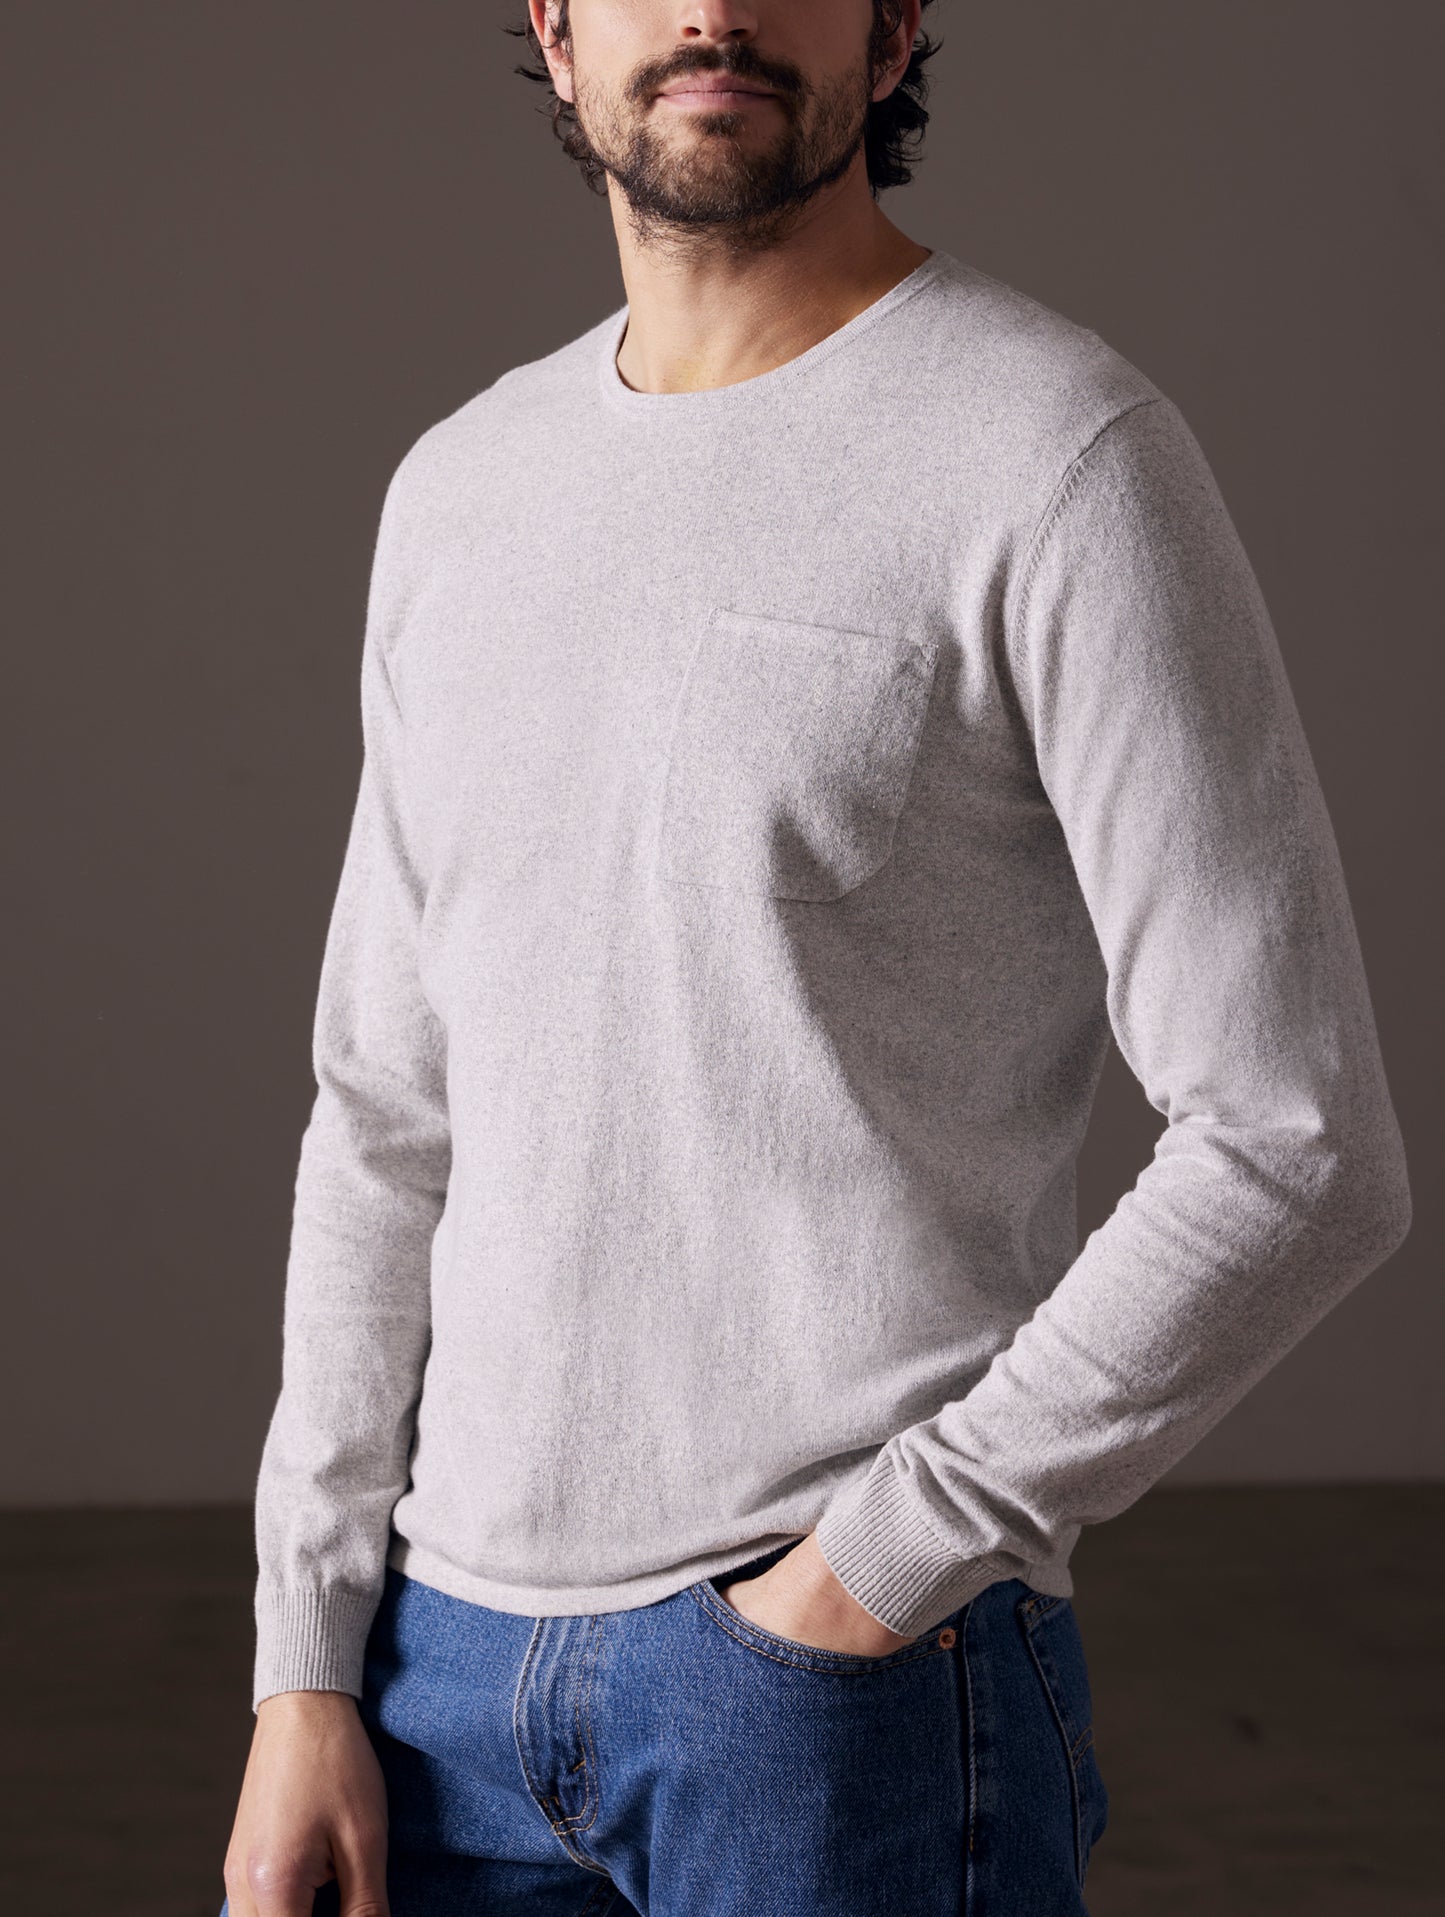 Man wearing light grey sweater from AETHER Apparel